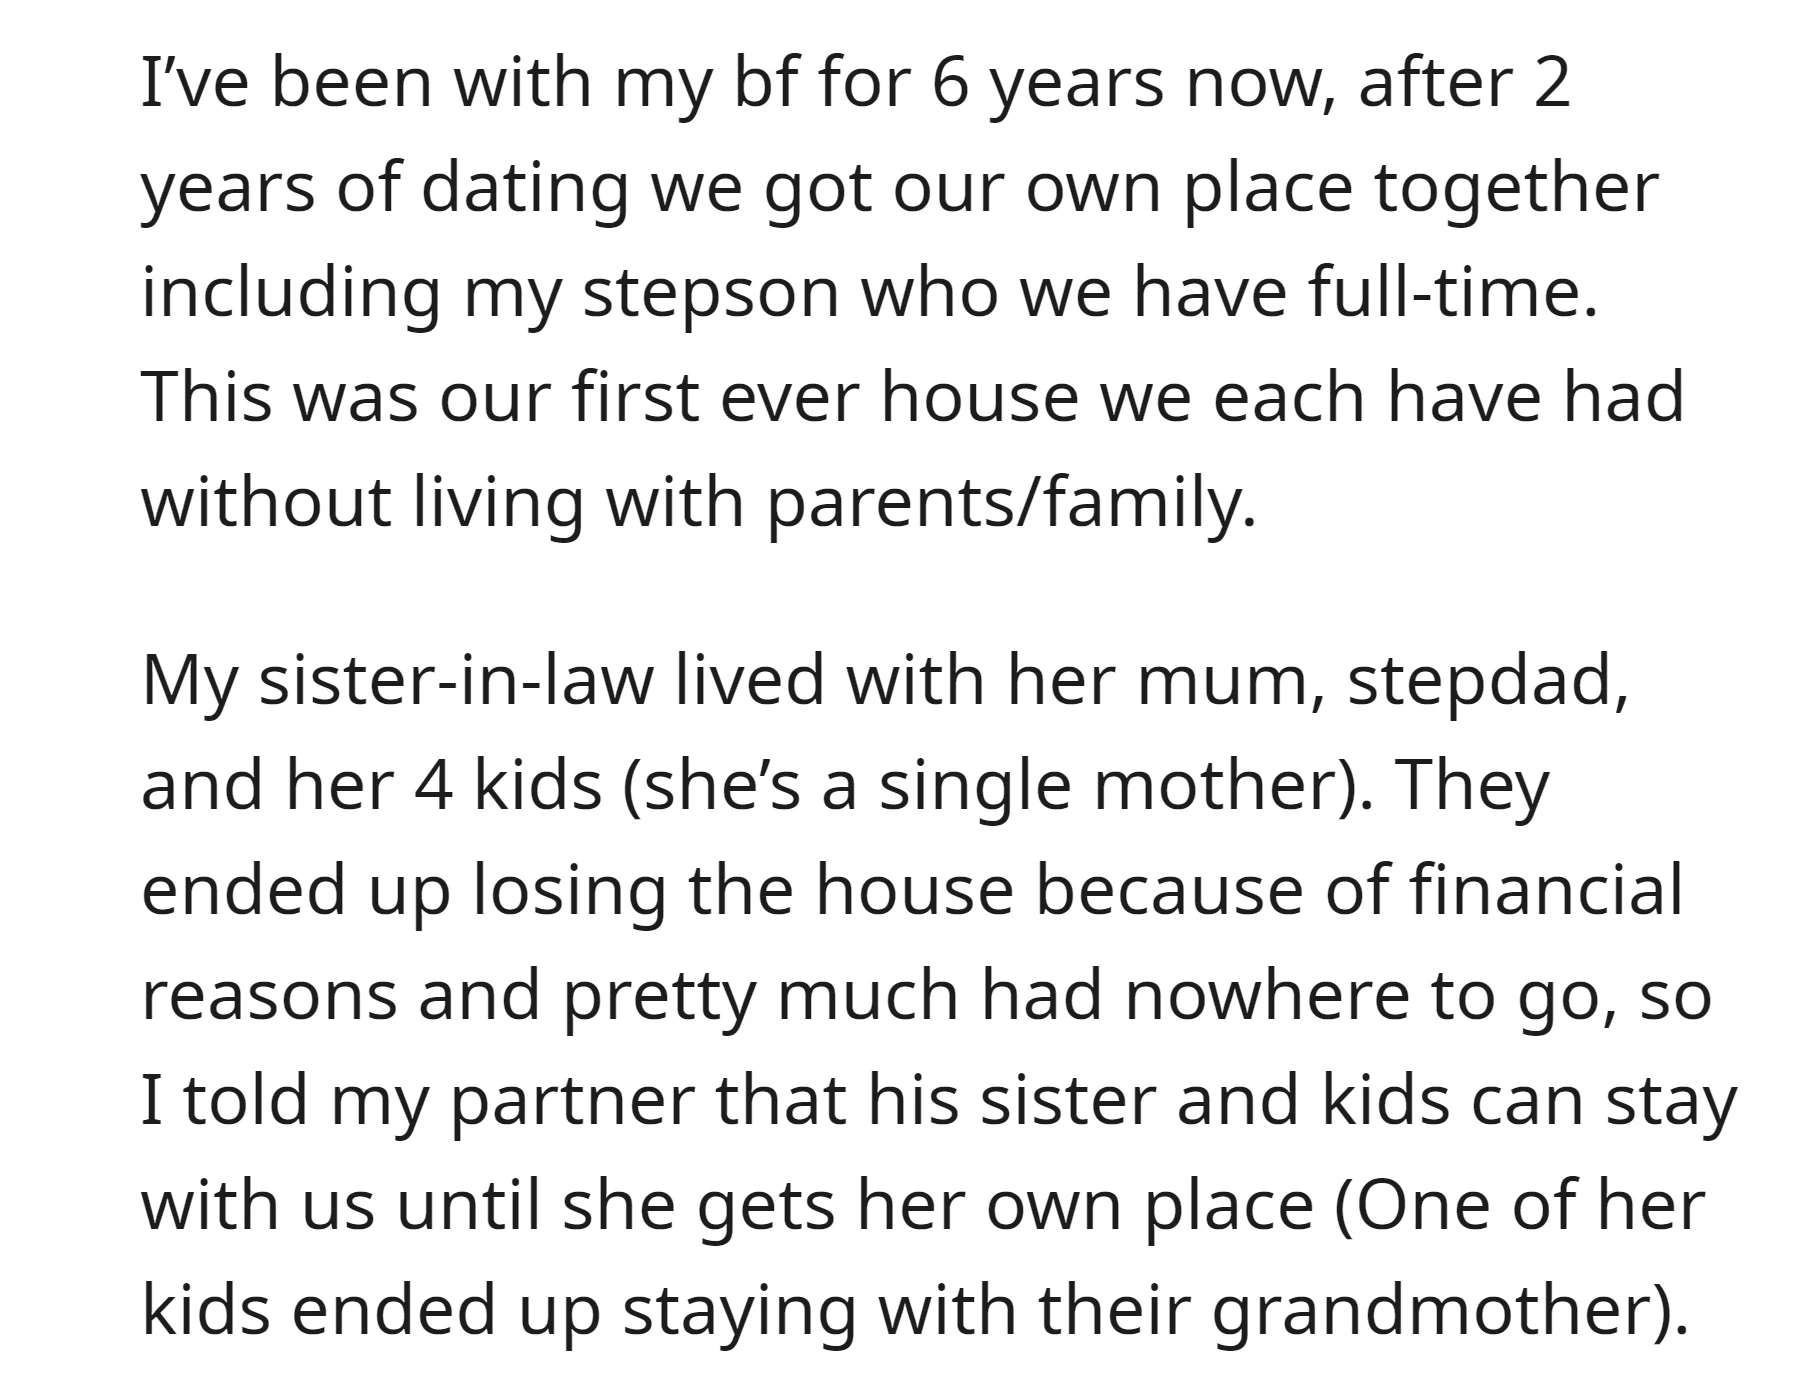 When the boyfriend's sister faced financial difficulties, the OP offered her and her 3 kids a place to stay